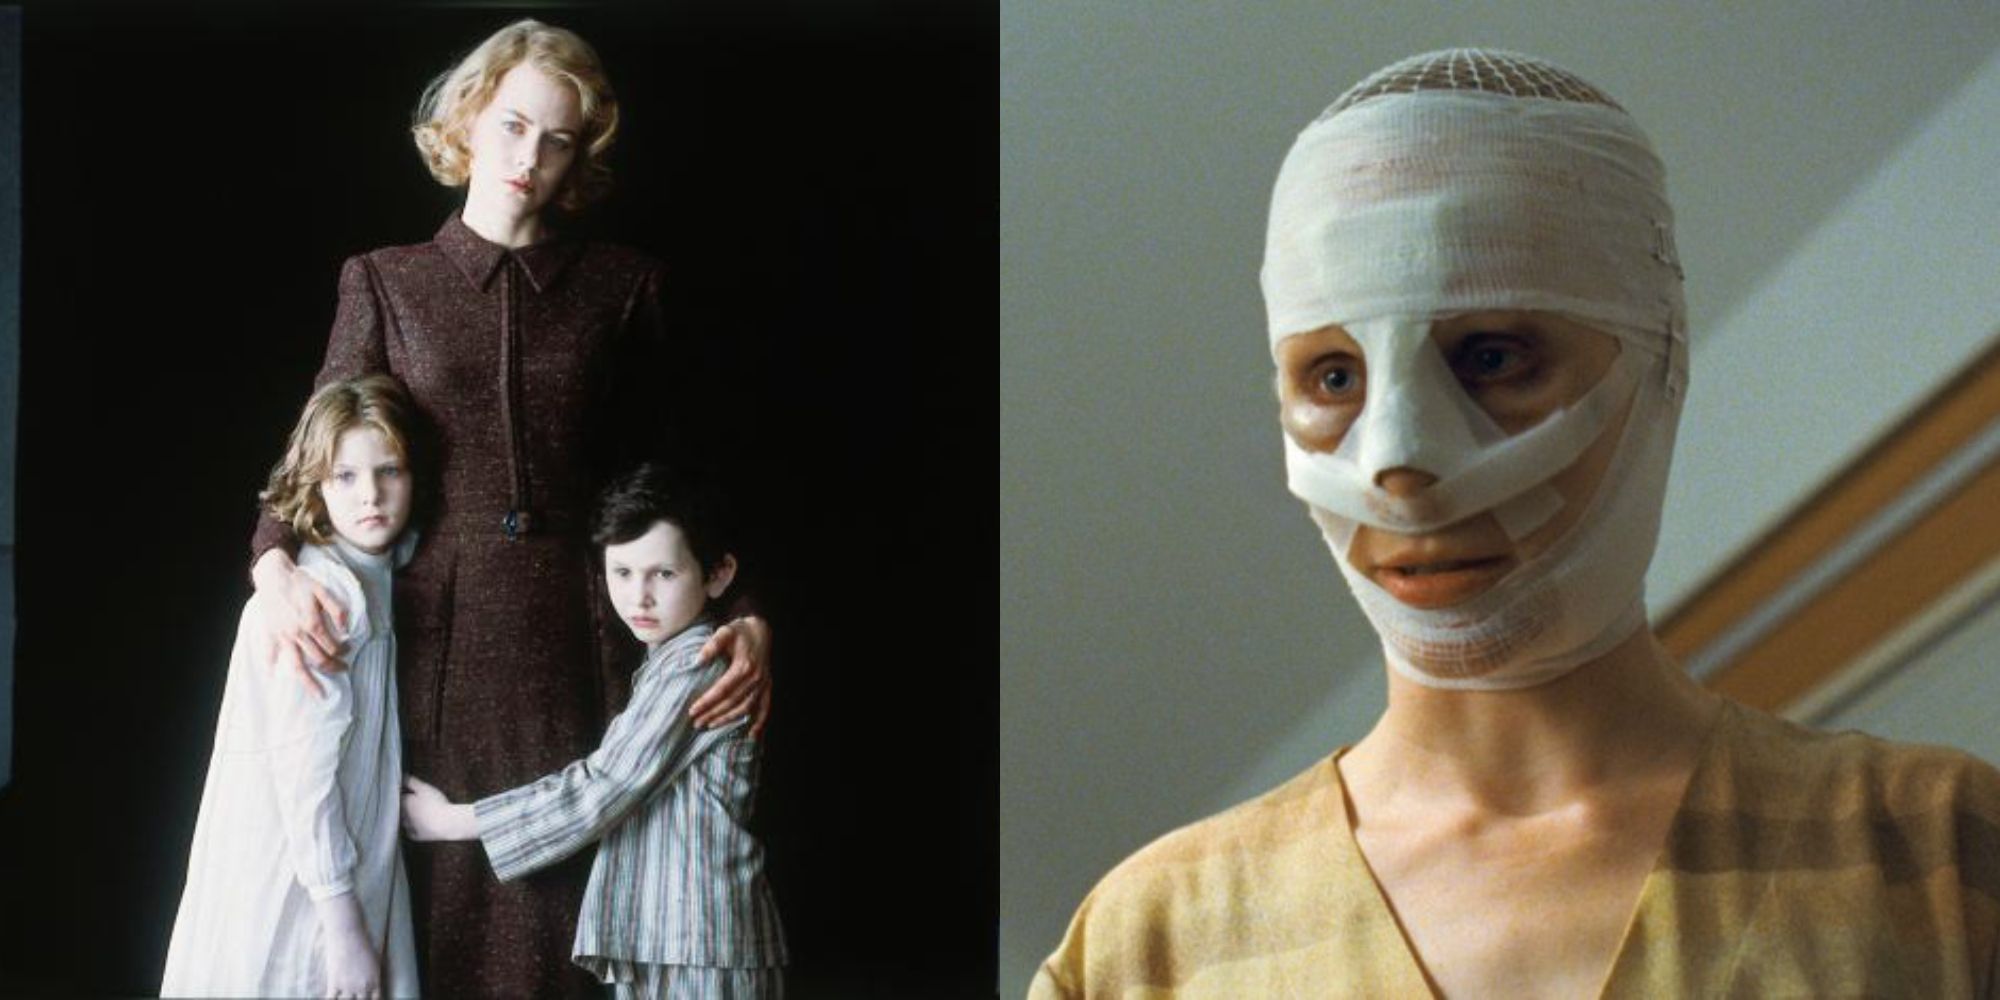 Split image showing characters from The Others and Goodnight Mommy.